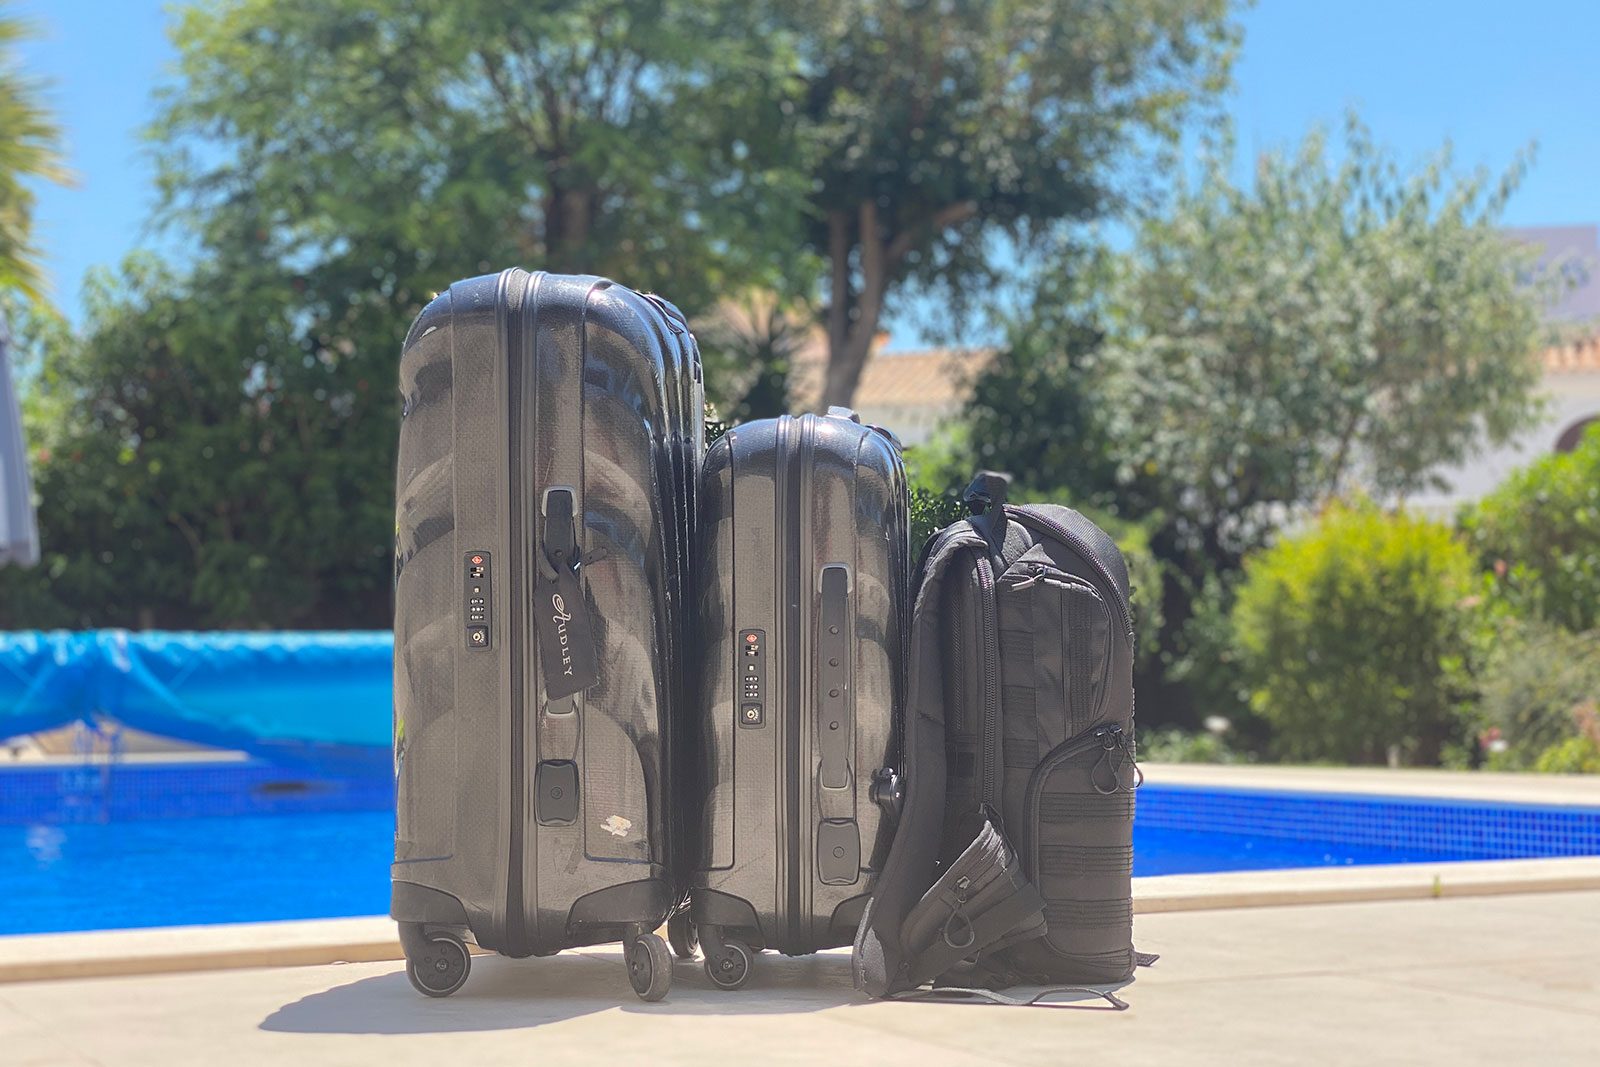 Two suitcases and a backpack in front of a swimming pool. The best backpack for travelling